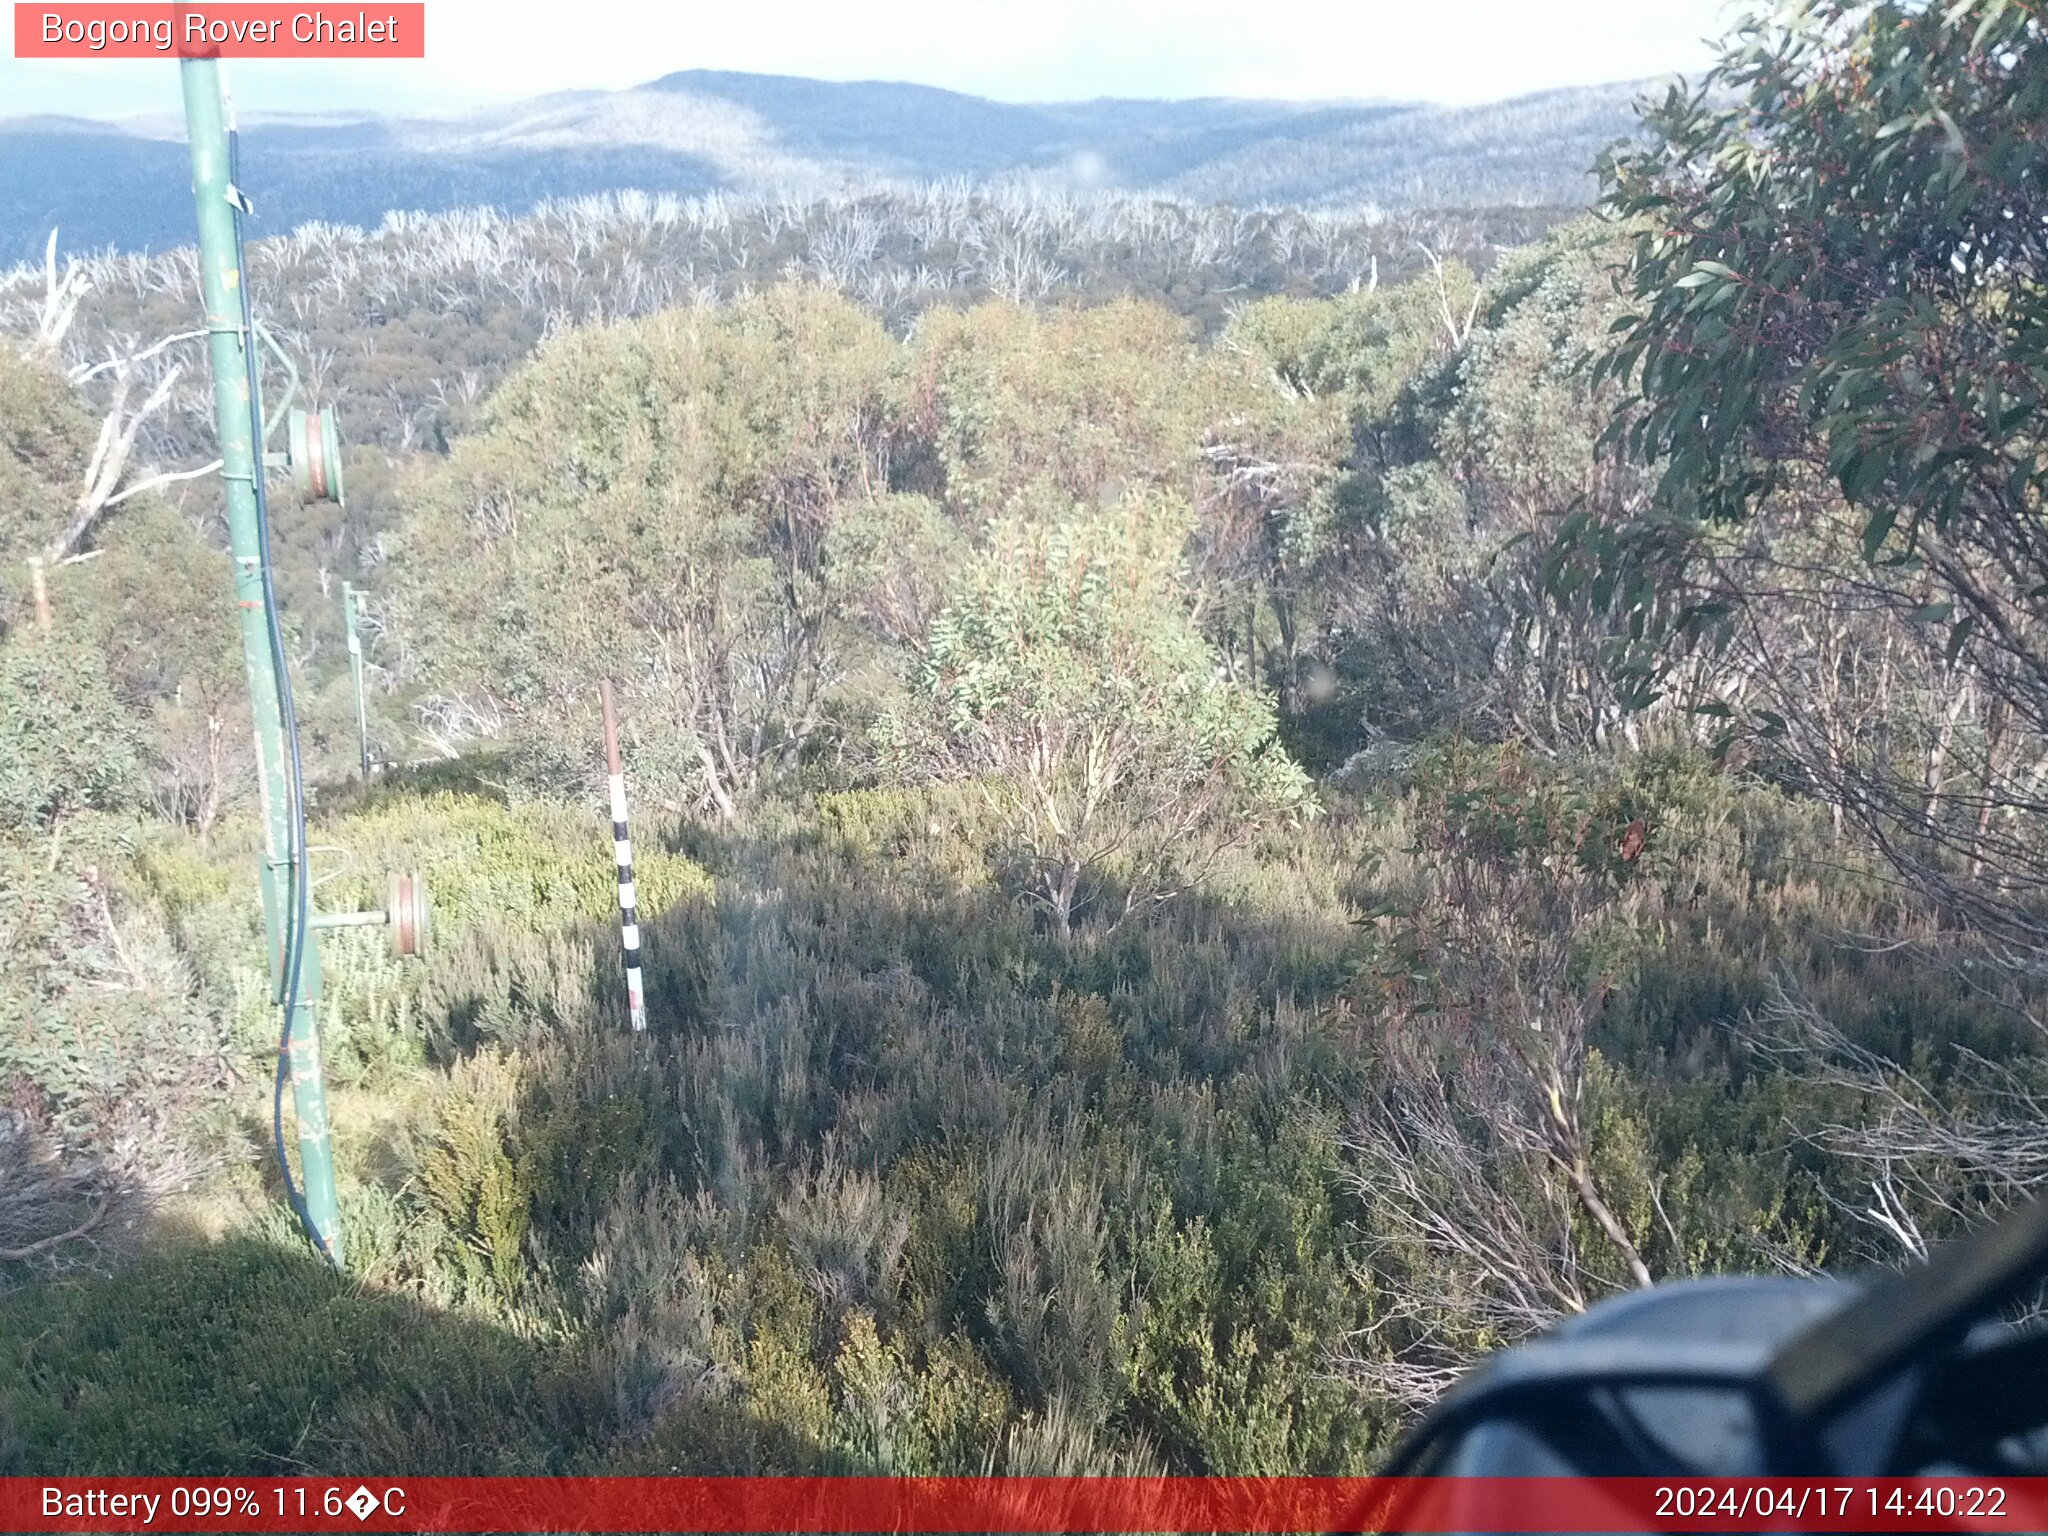 Bogong Web Cam 2:40pm Wednesday 17th of April 2024